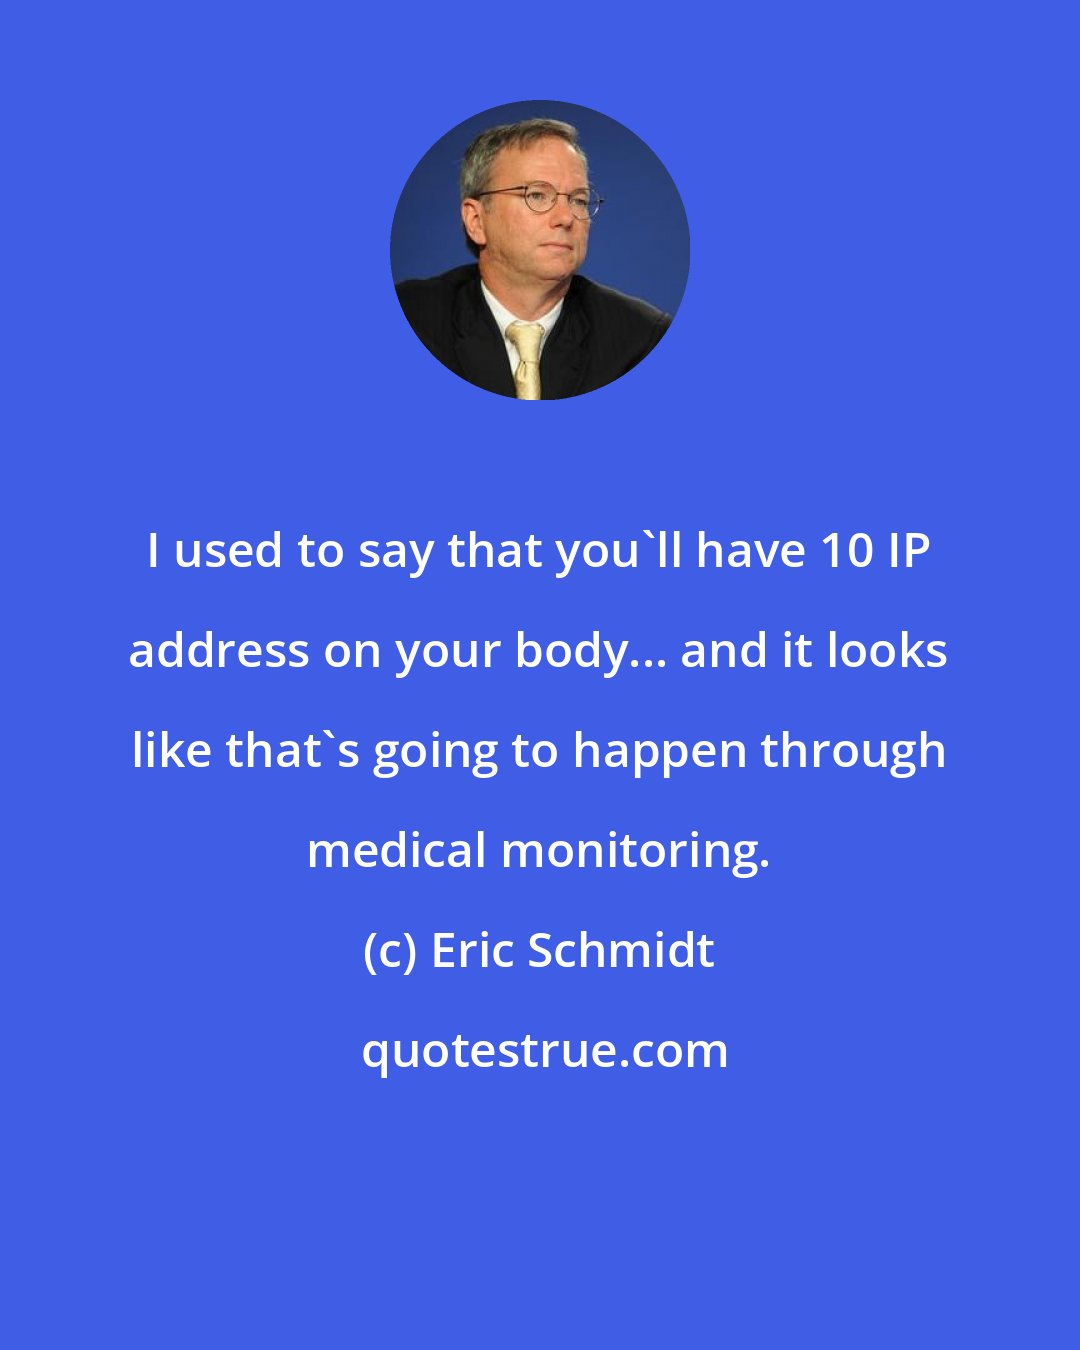 Eric Schmidt: I used to say that you'll have 10 IP address on your body... and it looks like that's going to happen through medical monitoring.